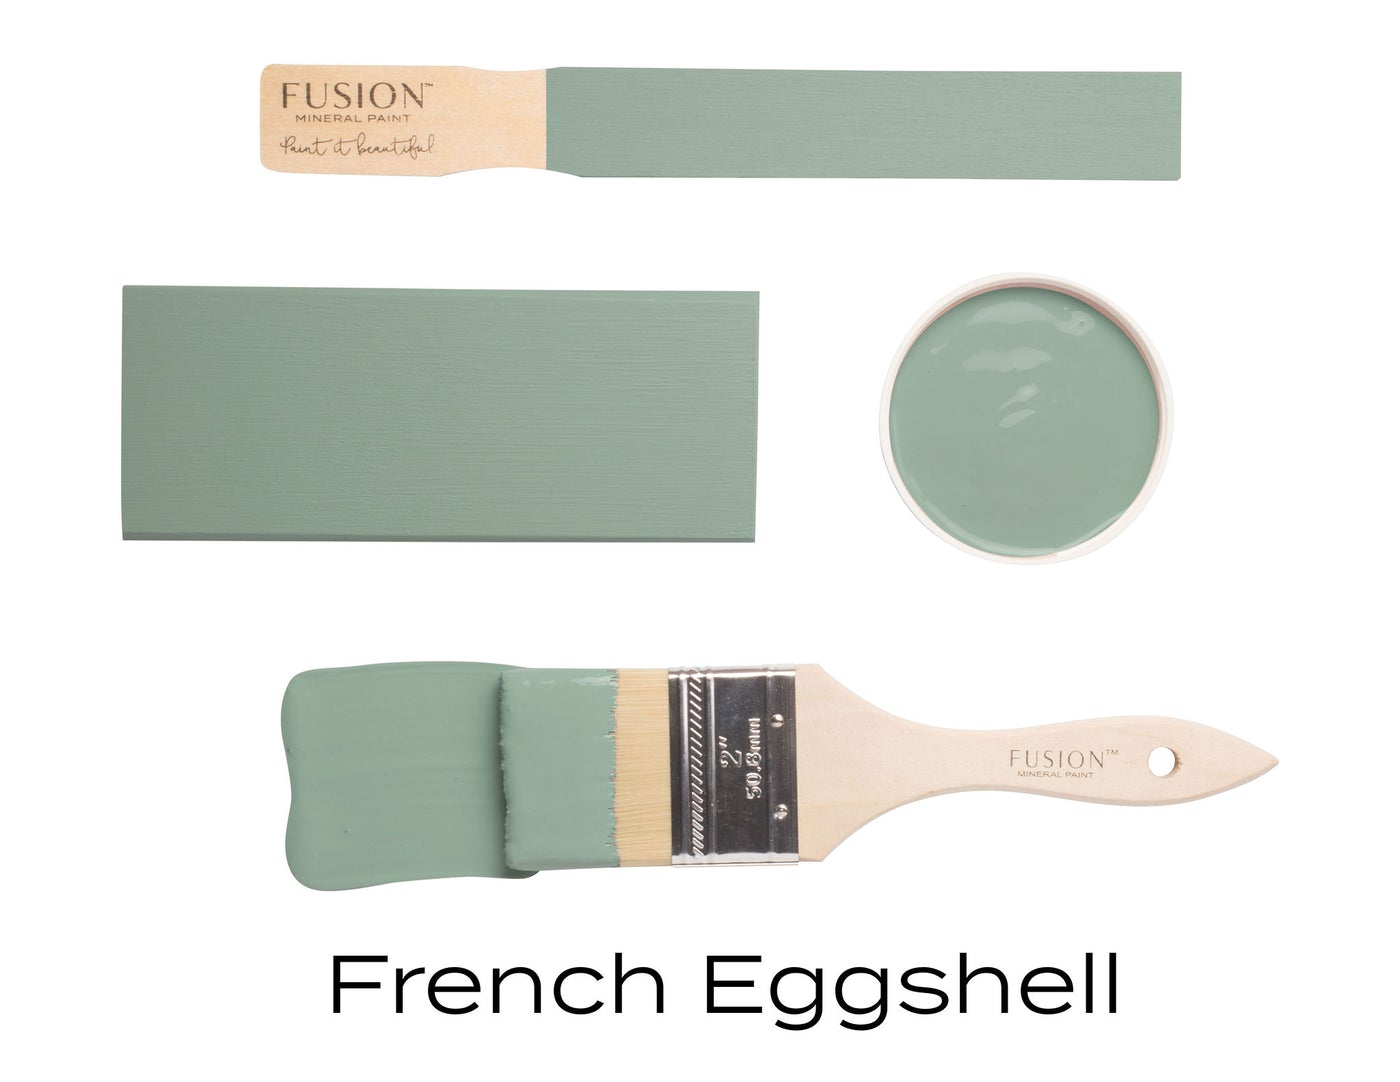 FRENCH EGGSHELL- FUSION MINERAL PAINT